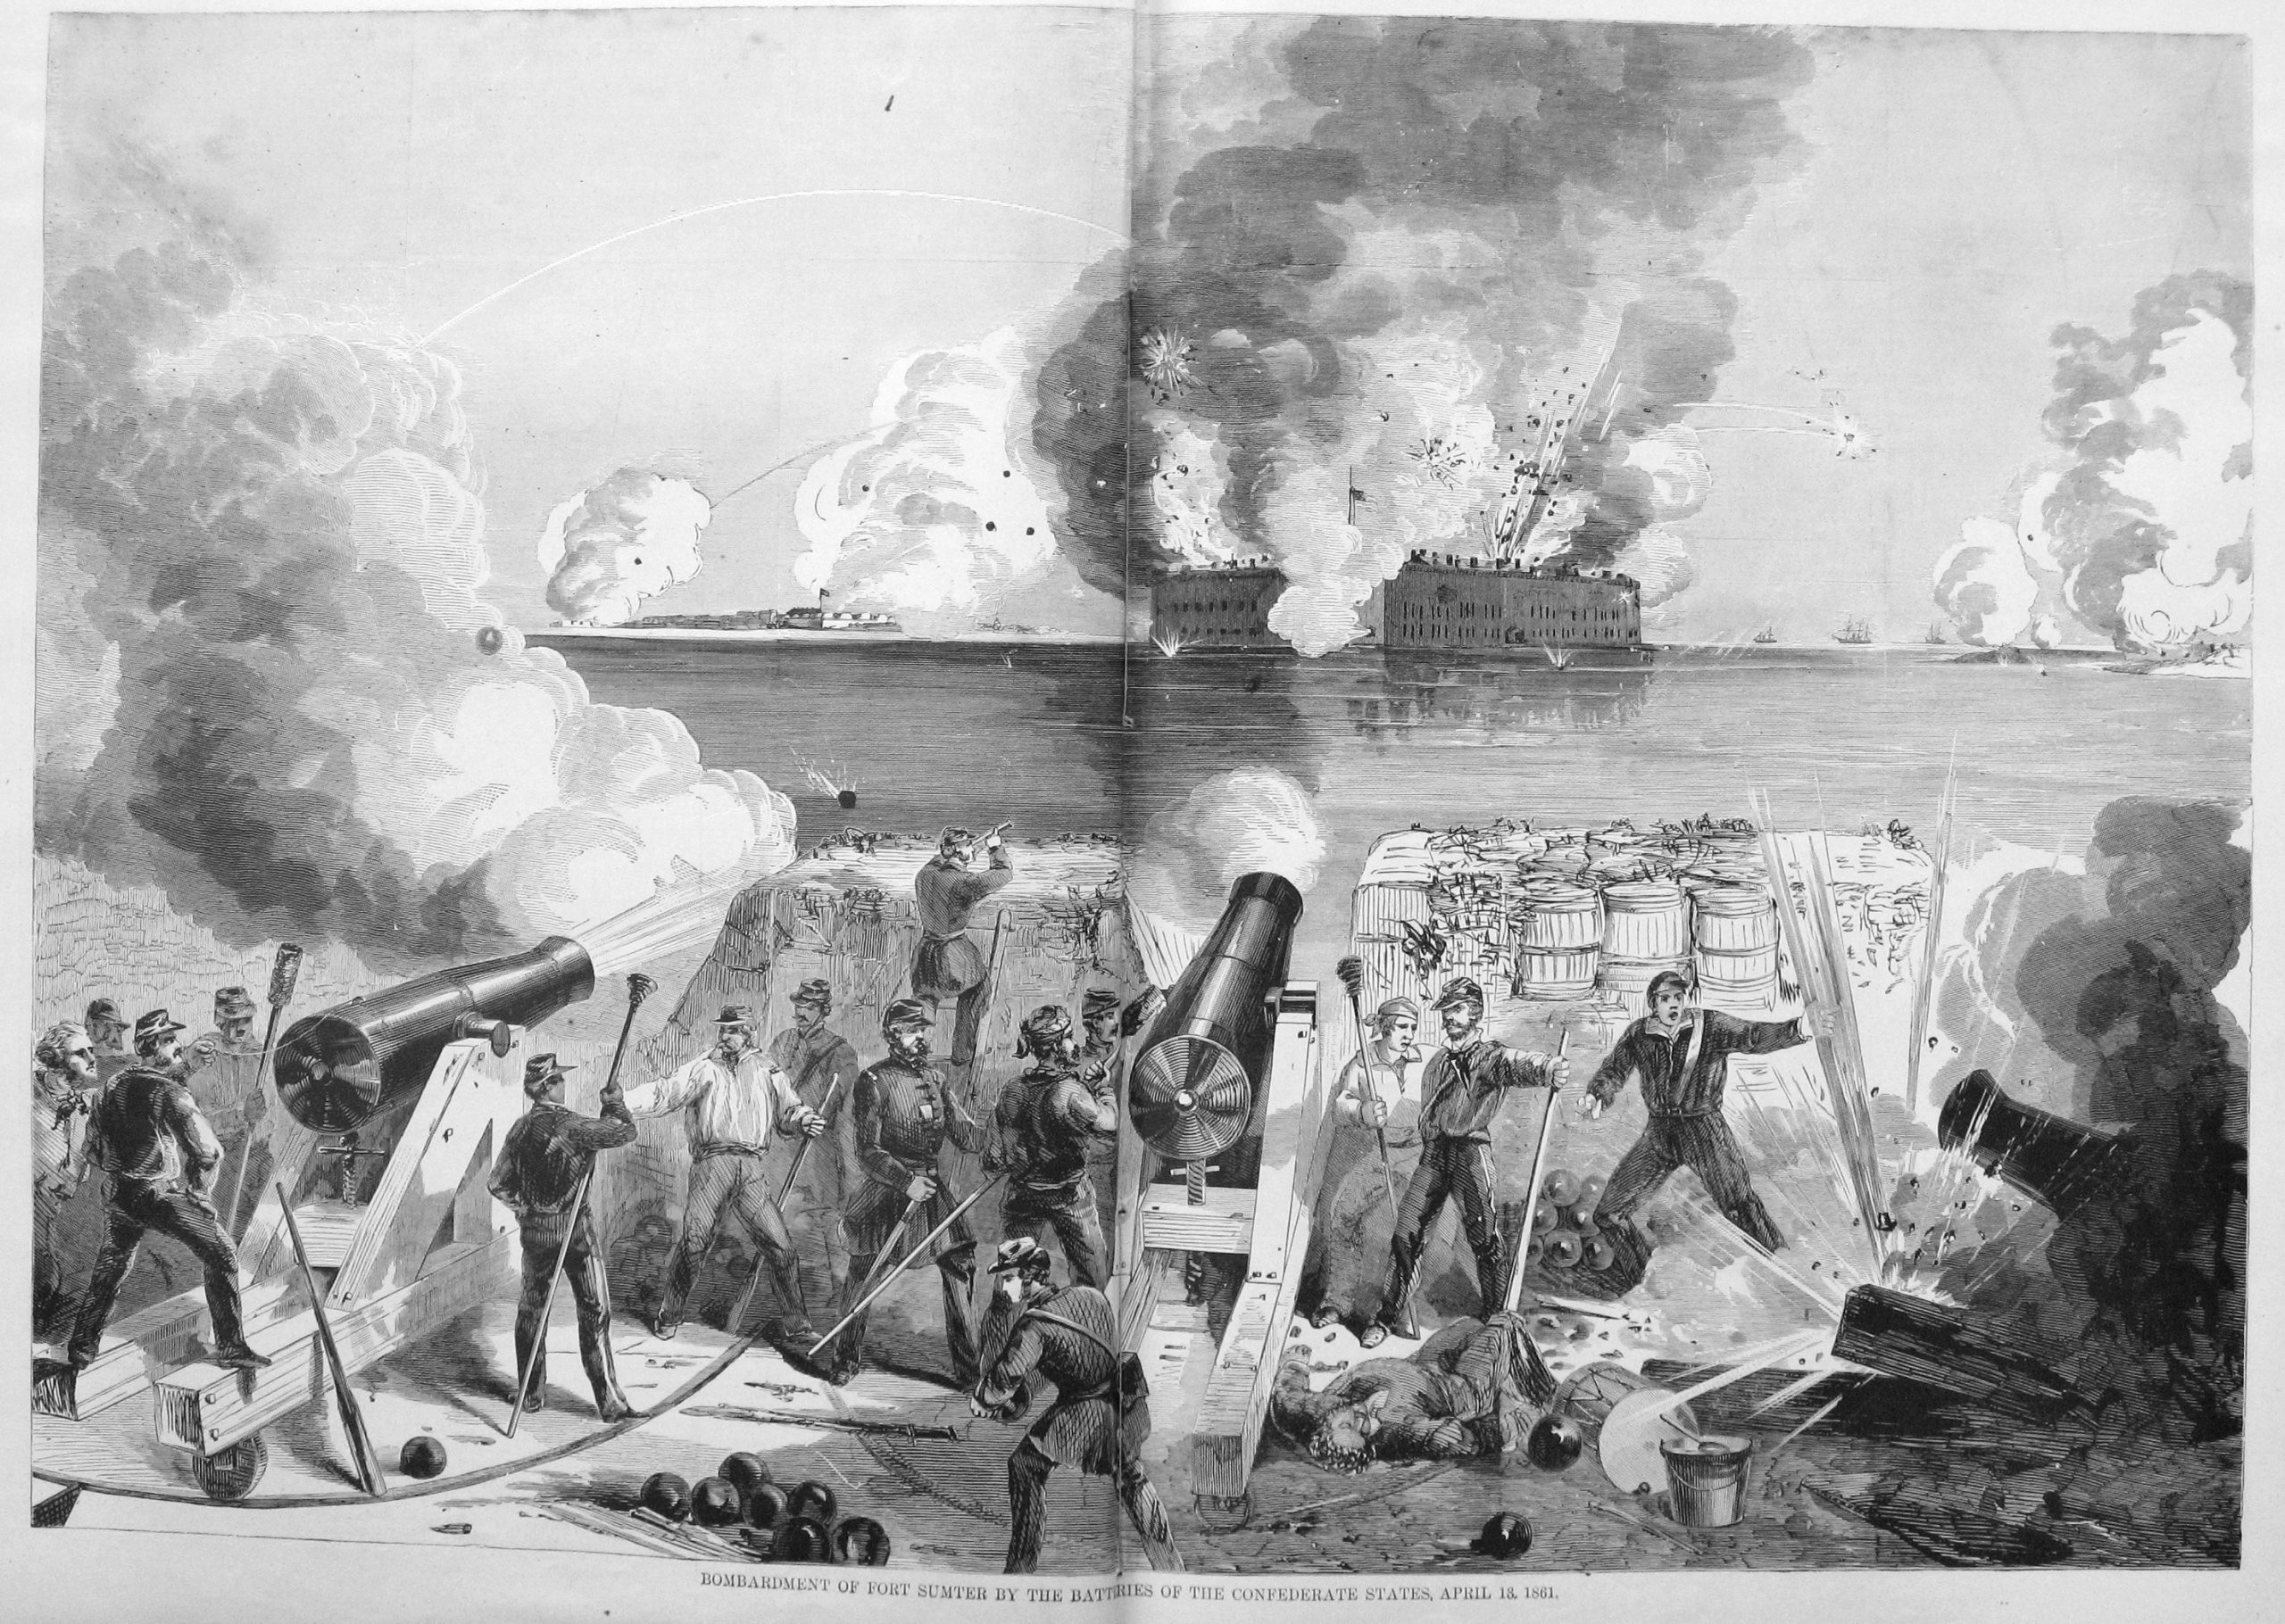 bombardment fort sumter april 13 1861 scaled